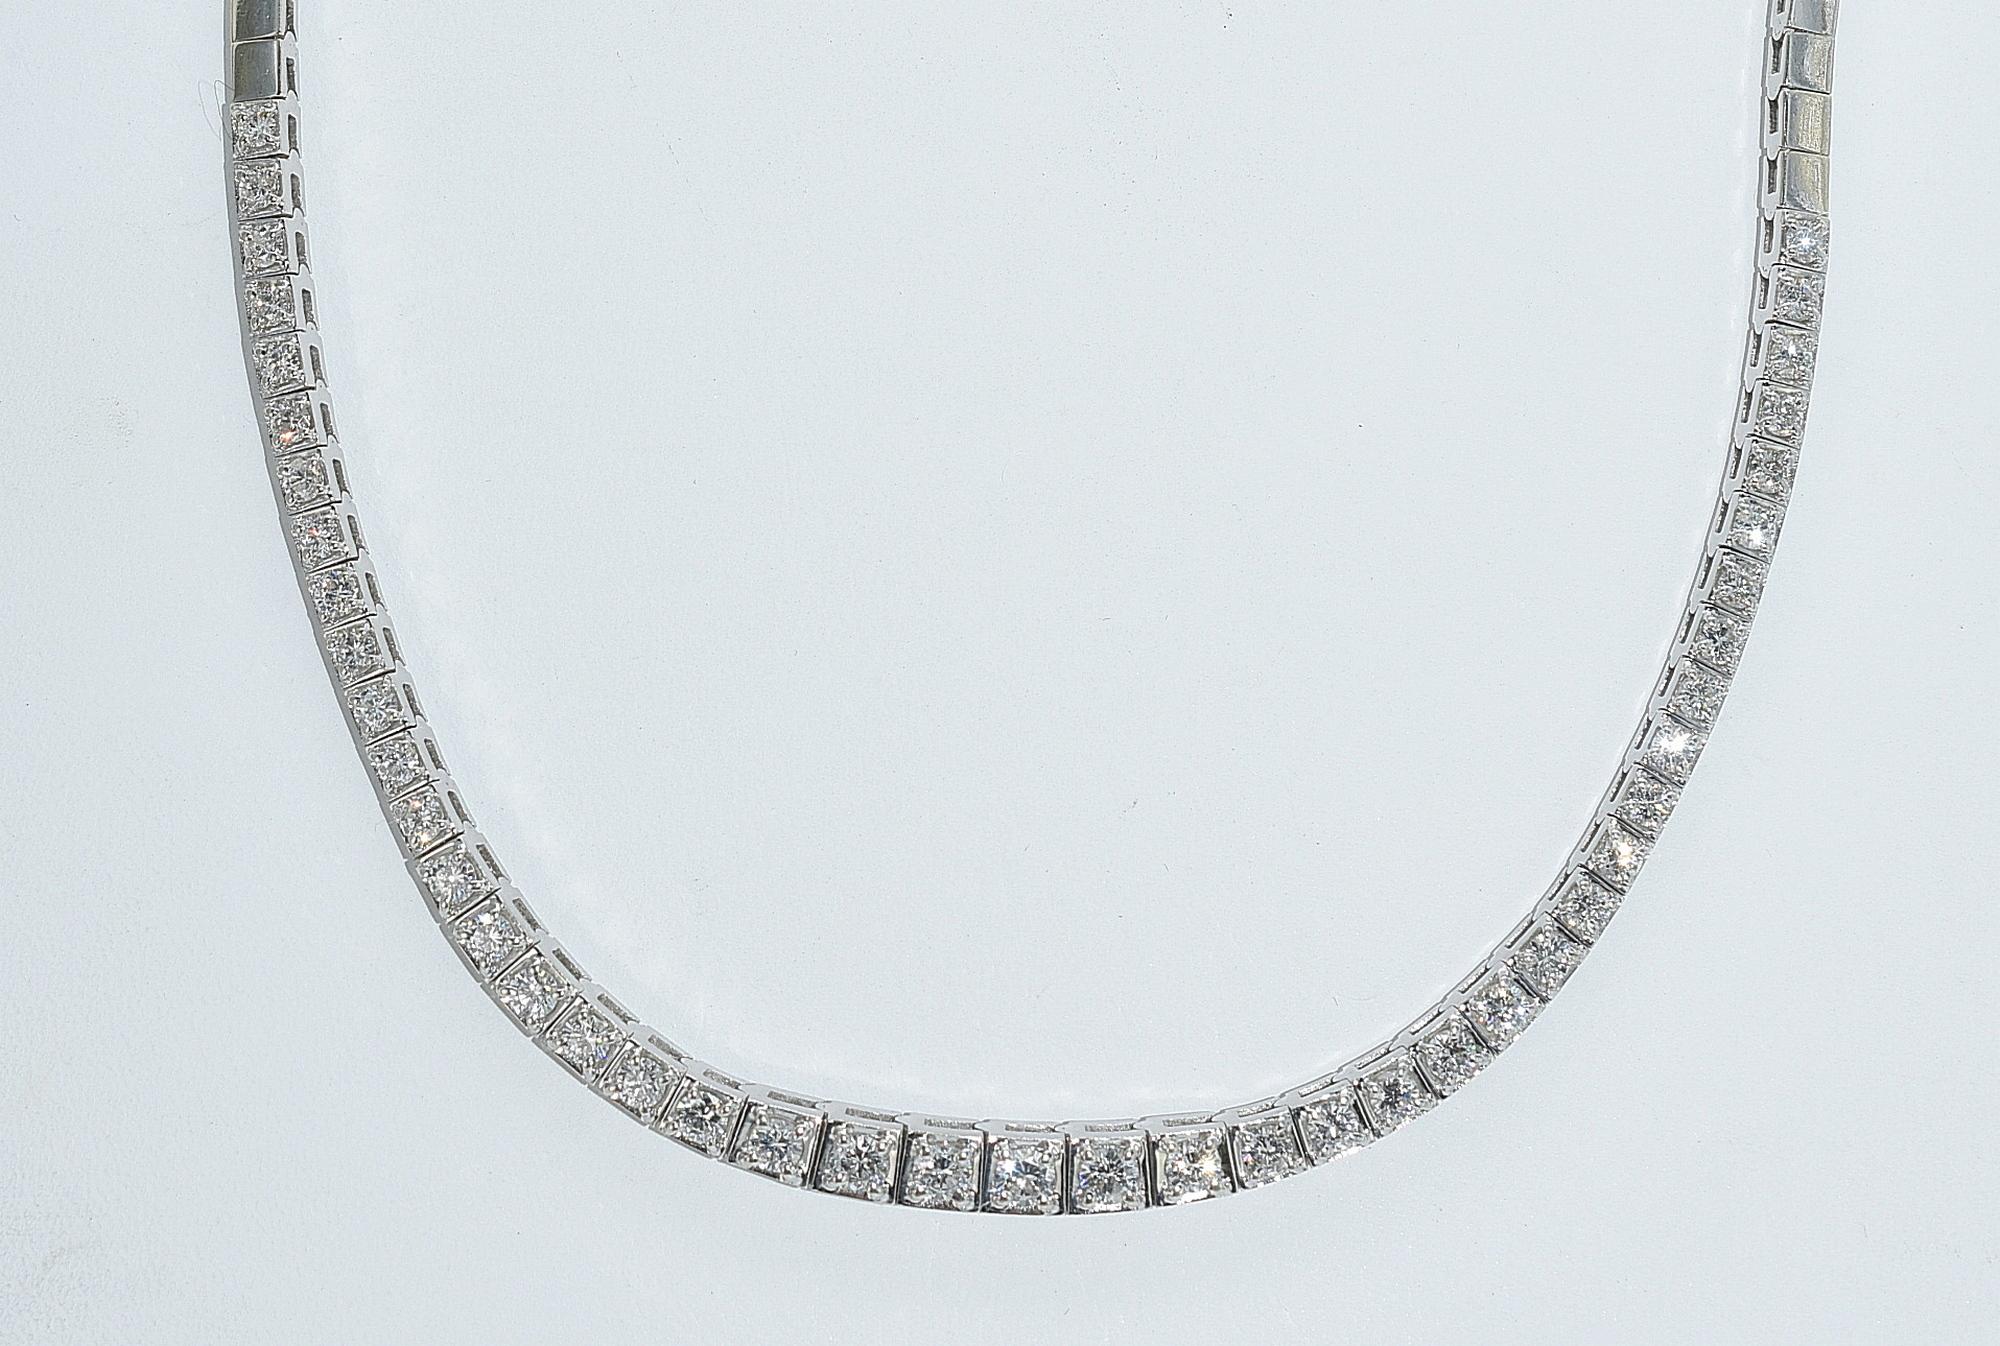 4.05cttw diamond and white gold necklace. 4.05 cttw diamond and 14k white gold necklace. 4.05 cttw, Clarity SI-3, Color H; 42 round brilliant cut diamonds, total diamond weight 4.05ct. Stamped 14K, approximately 17